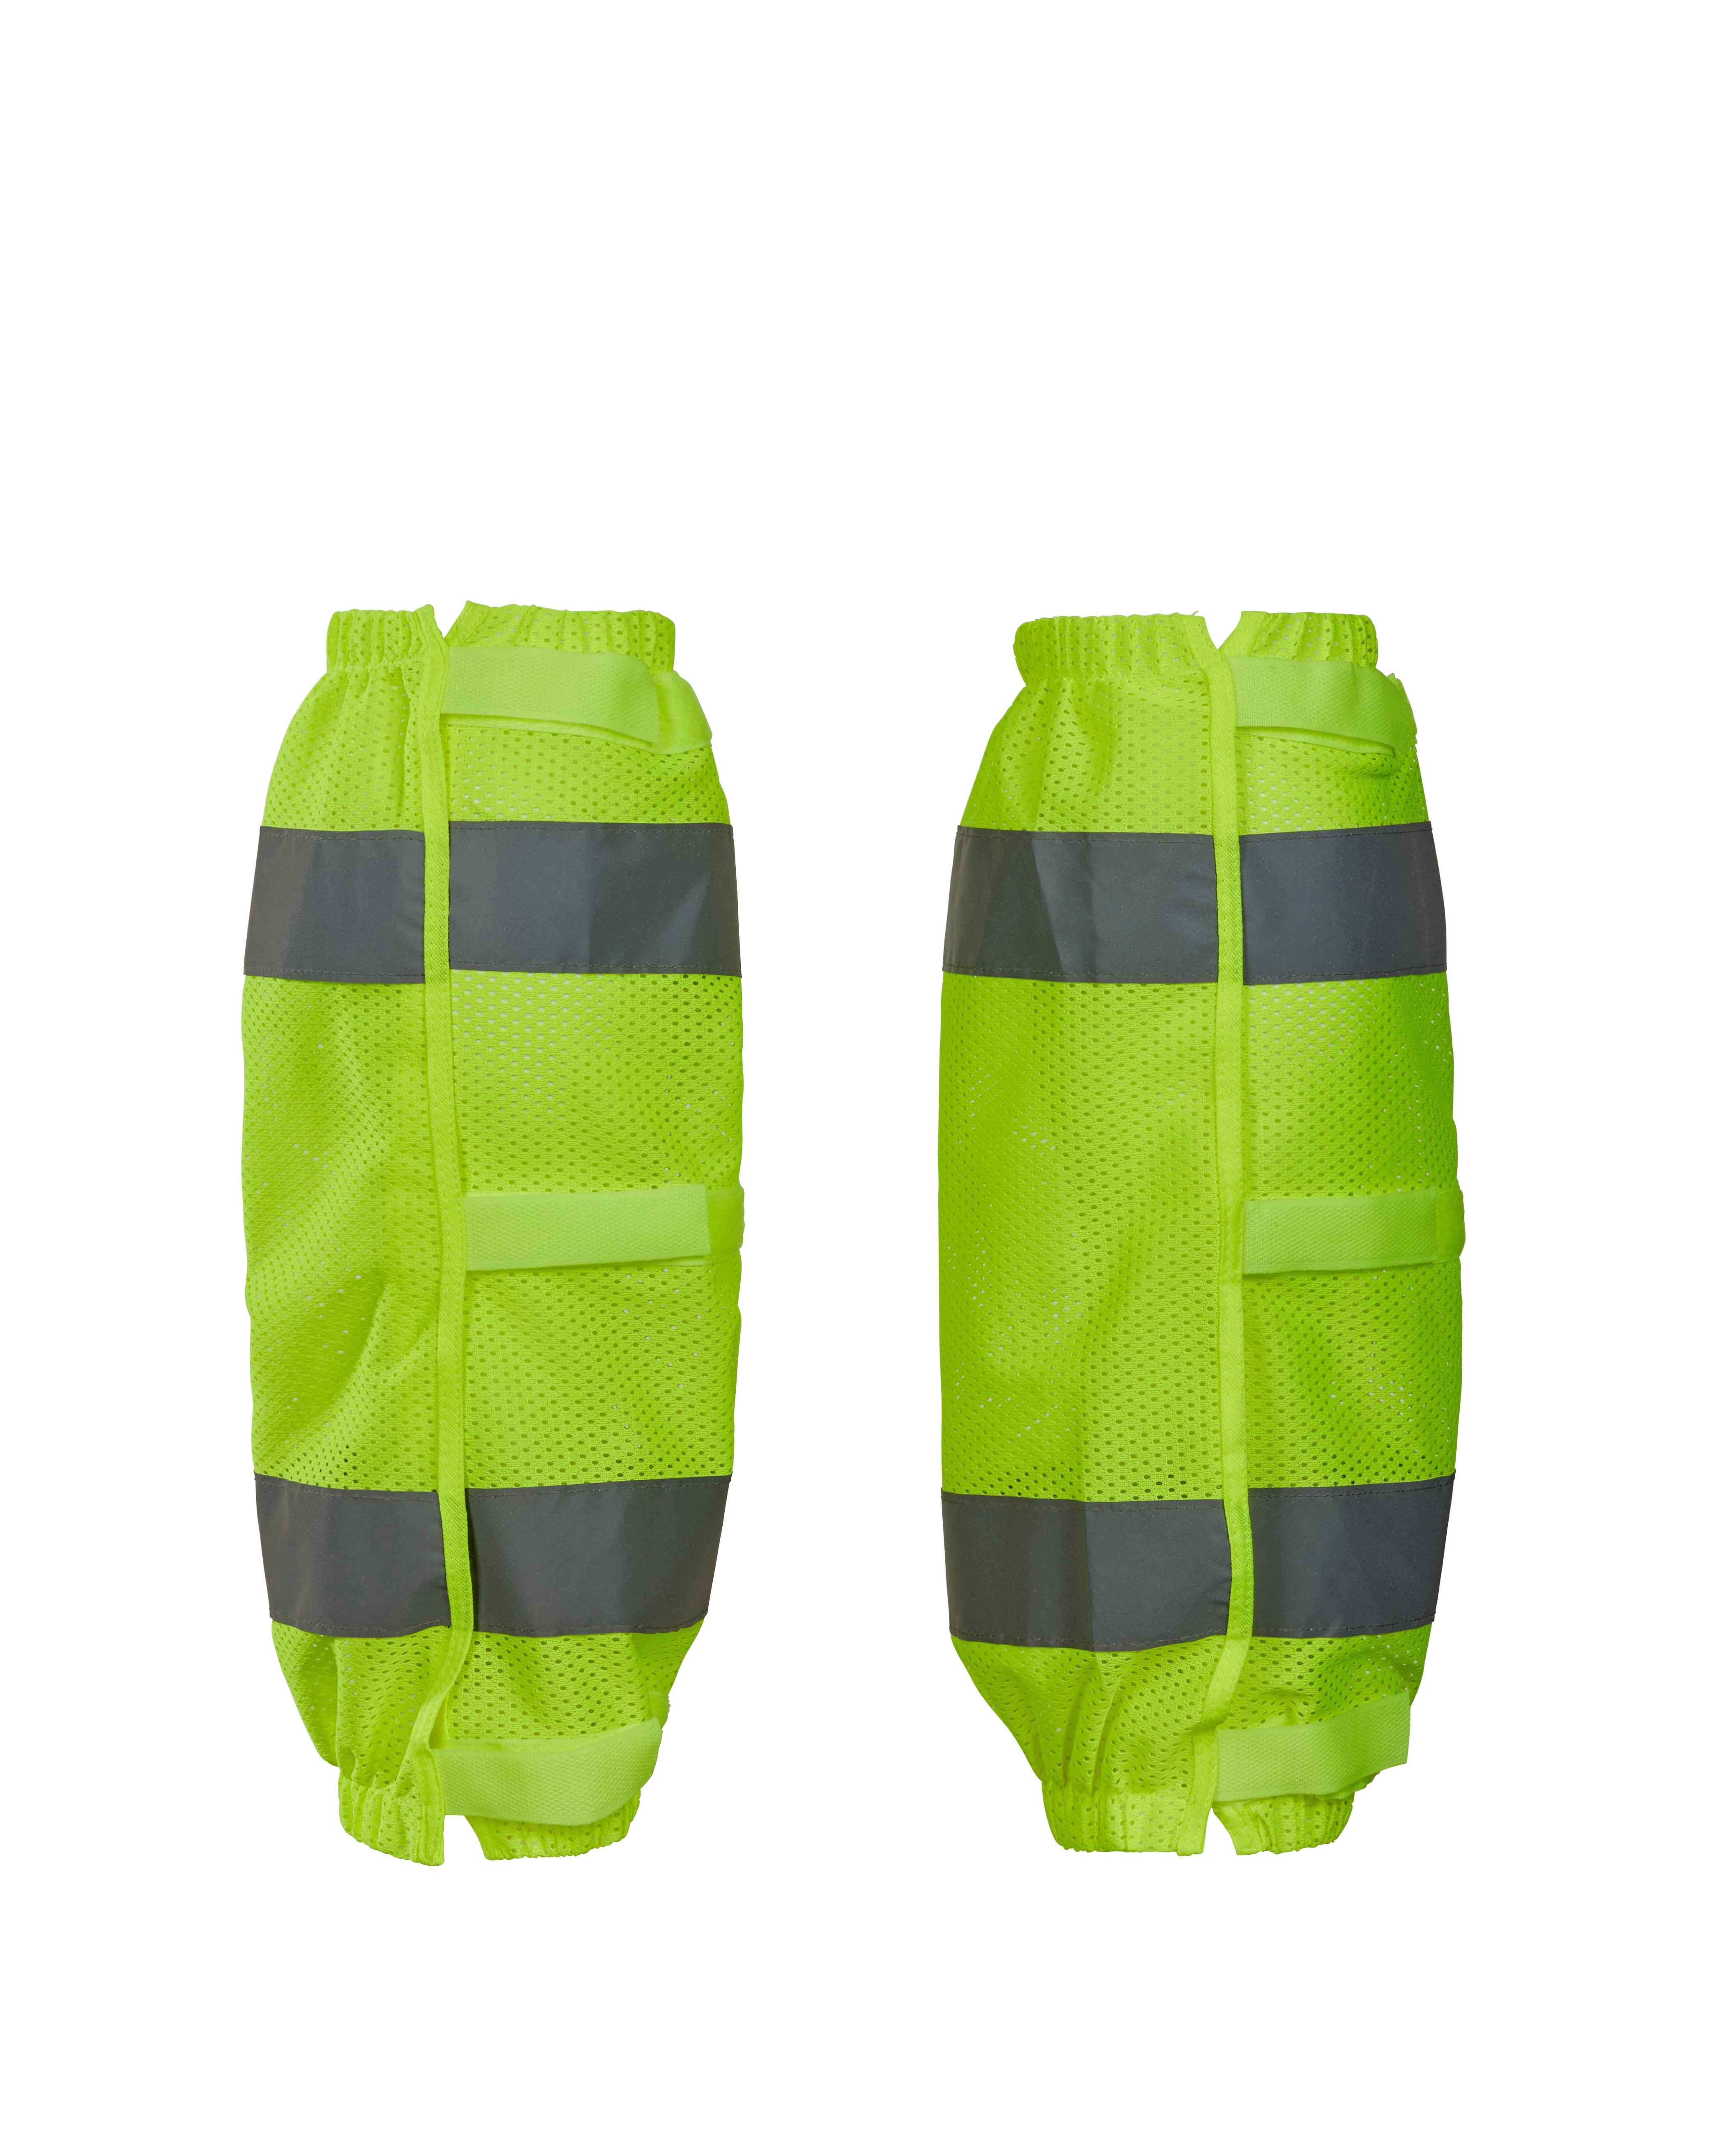 Picture of Max Apparel MAX121 Class E Leg Gaiter, Safety Green (per pair)